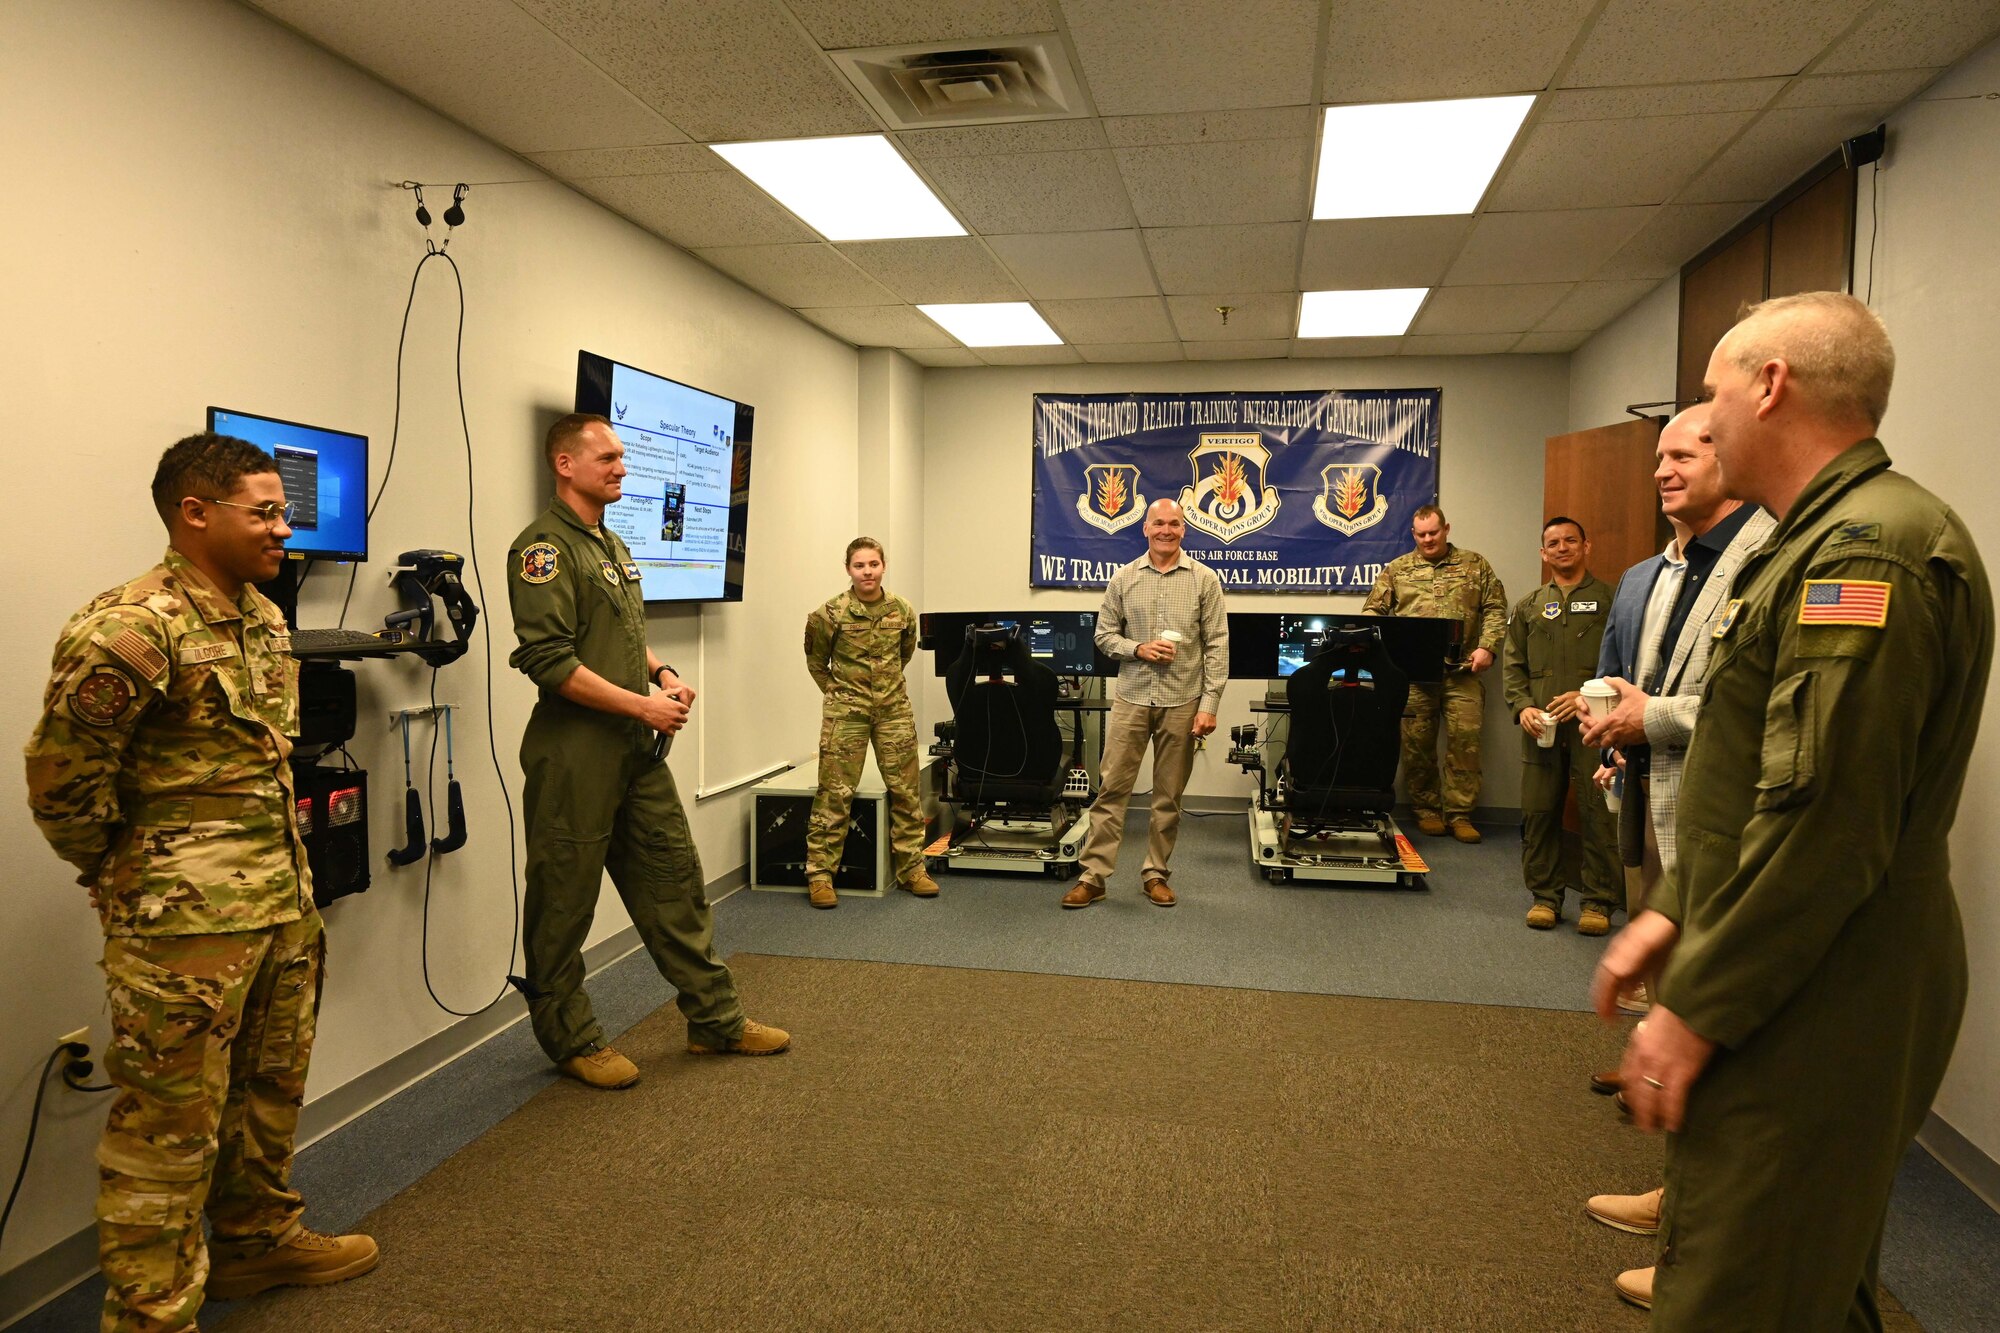 Members from the 97th Operations Group show off new training technology in the “VR Cafe” as part of the second annual “Legacy of the Spear” event at Altus Air Force Base, Oklahoma, April 14, 2023. This year’s event welcomed back the nine previous 97th Air Mobility Wing commanders and command chiefs and 19th Air Force leadership. (U.S. Air Force photo by Airman 1st Class Miyah Gray)